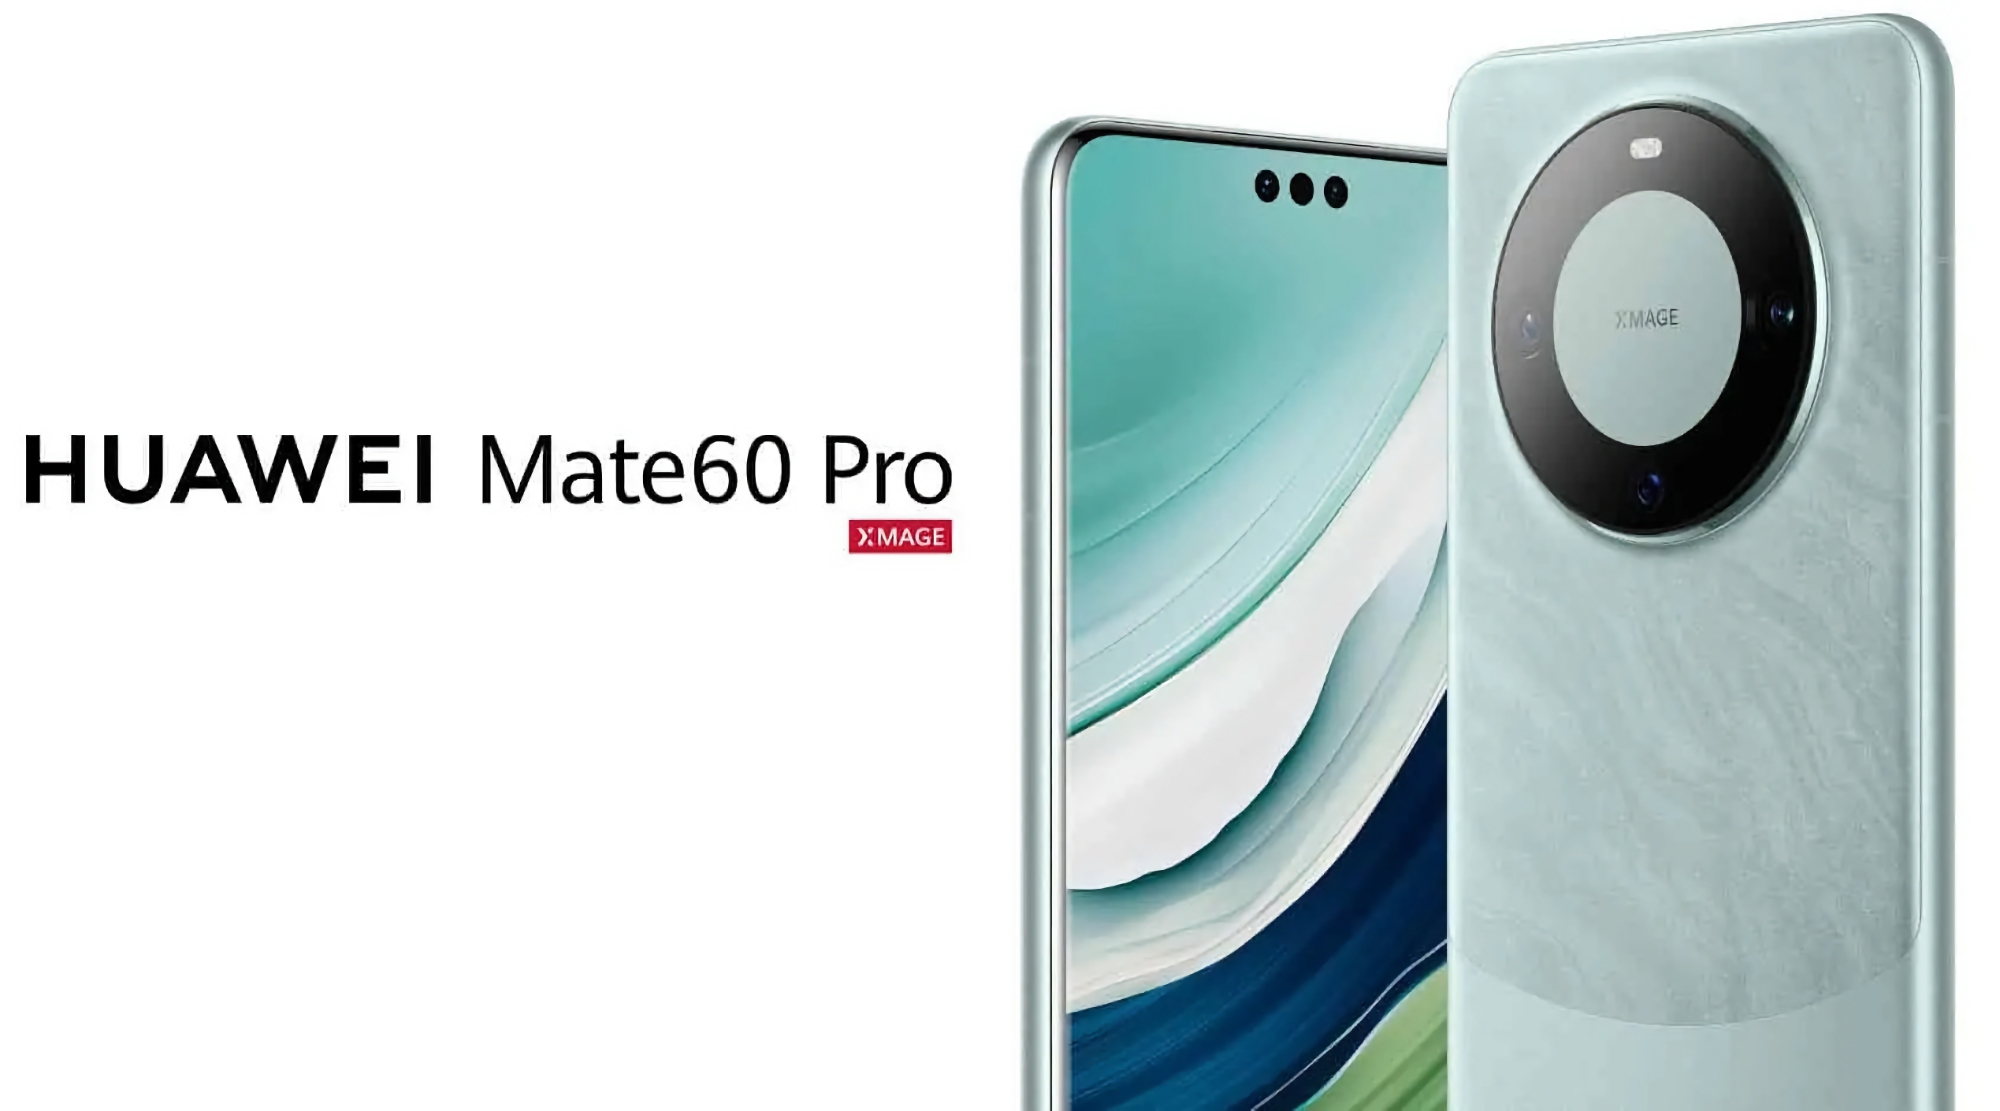 Huawei Mate 60 Pro launched in China